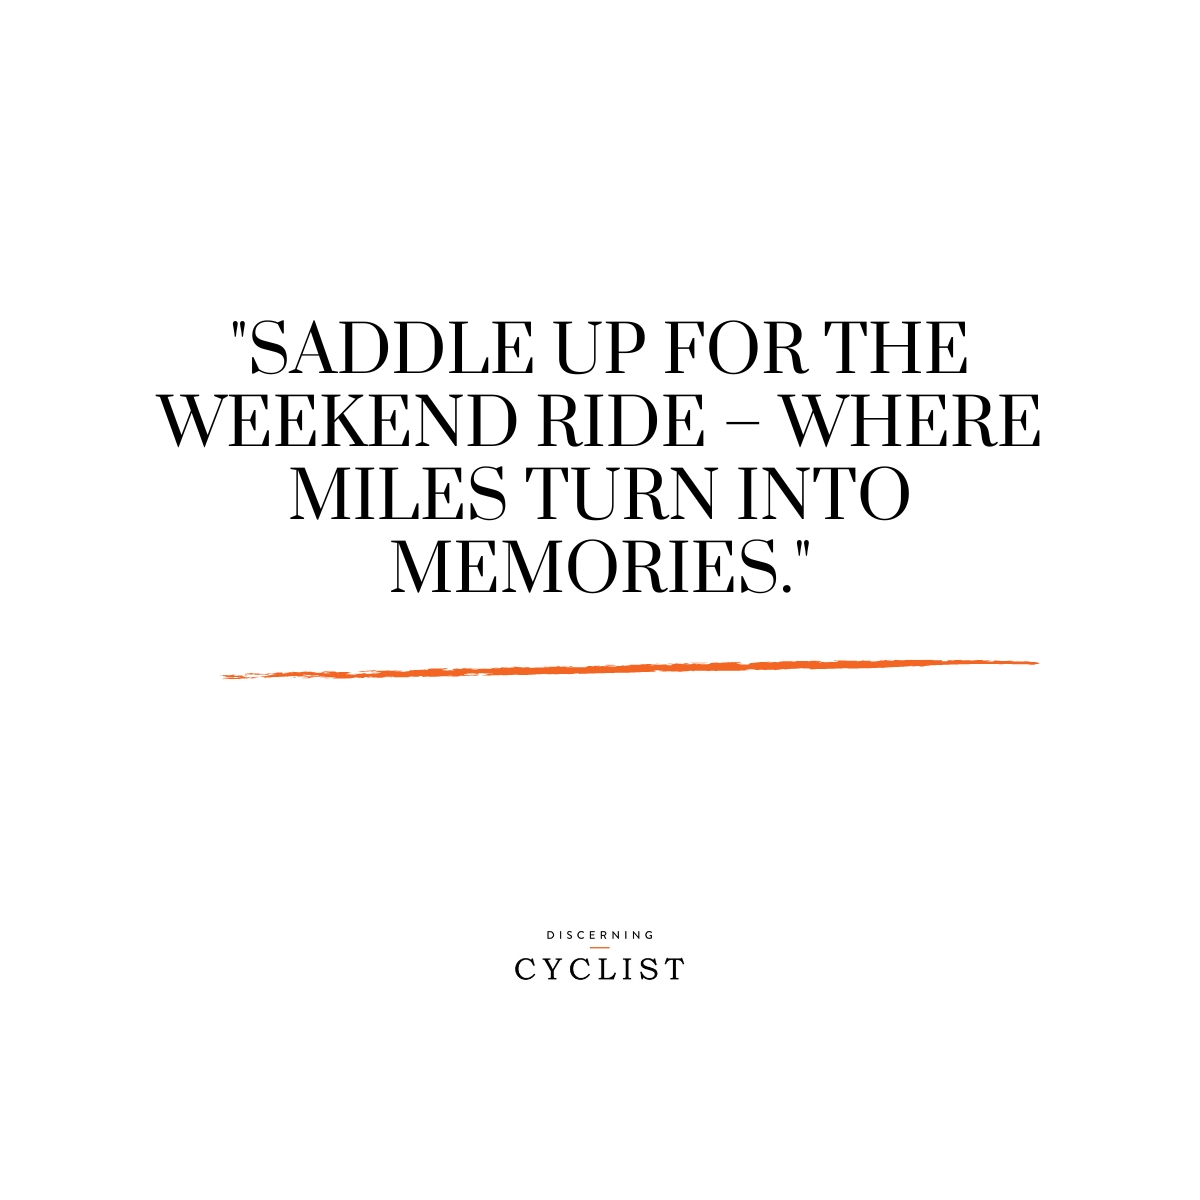 "Saddle up for the weekend ride – where miles turn into memories."